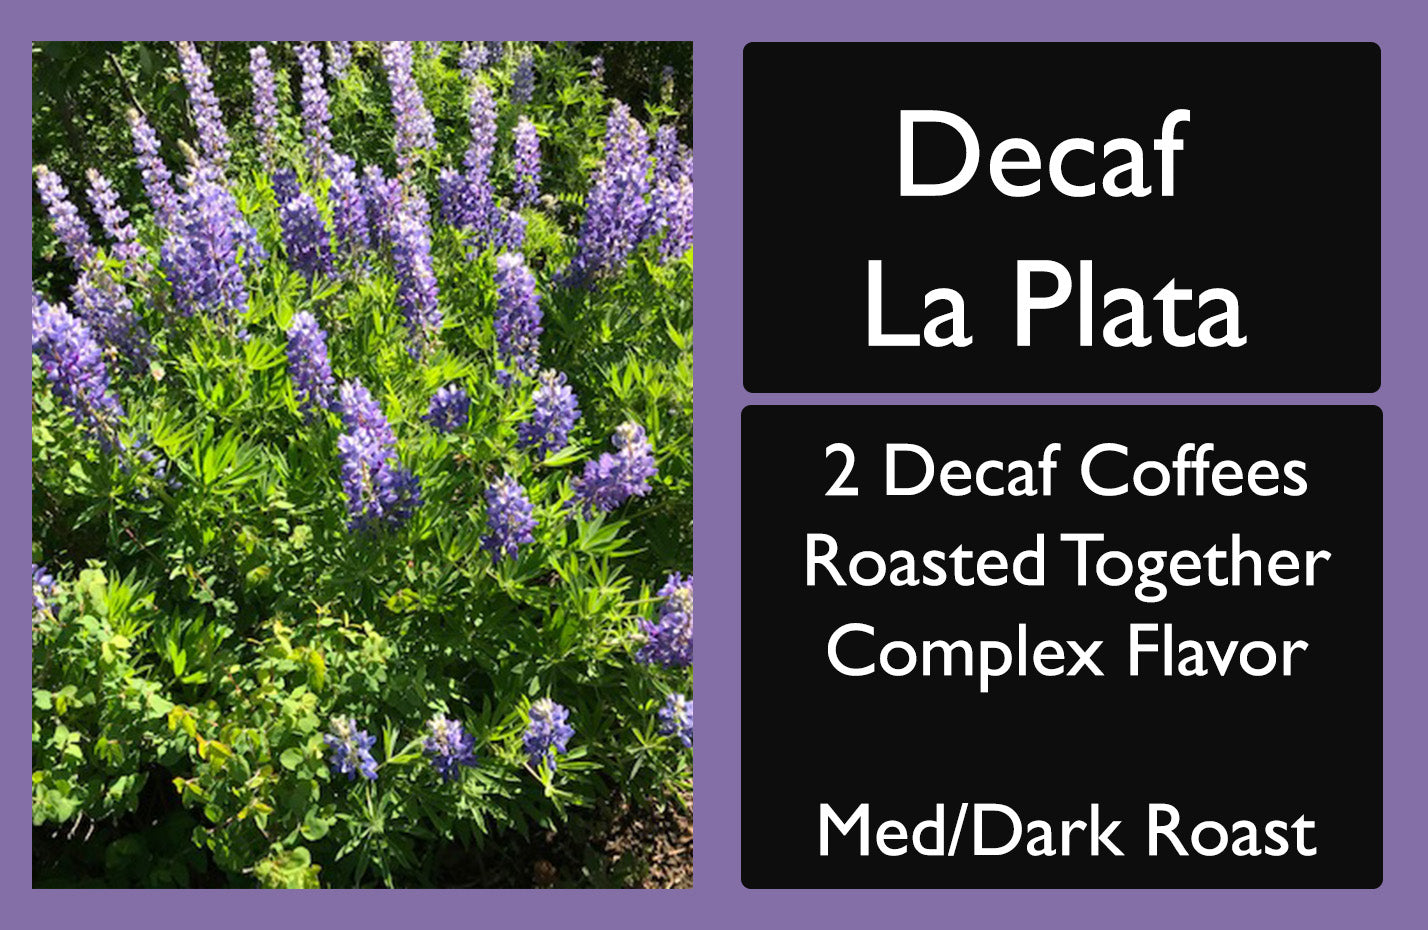 Picture of a bag of Decaf La Plata Coffee